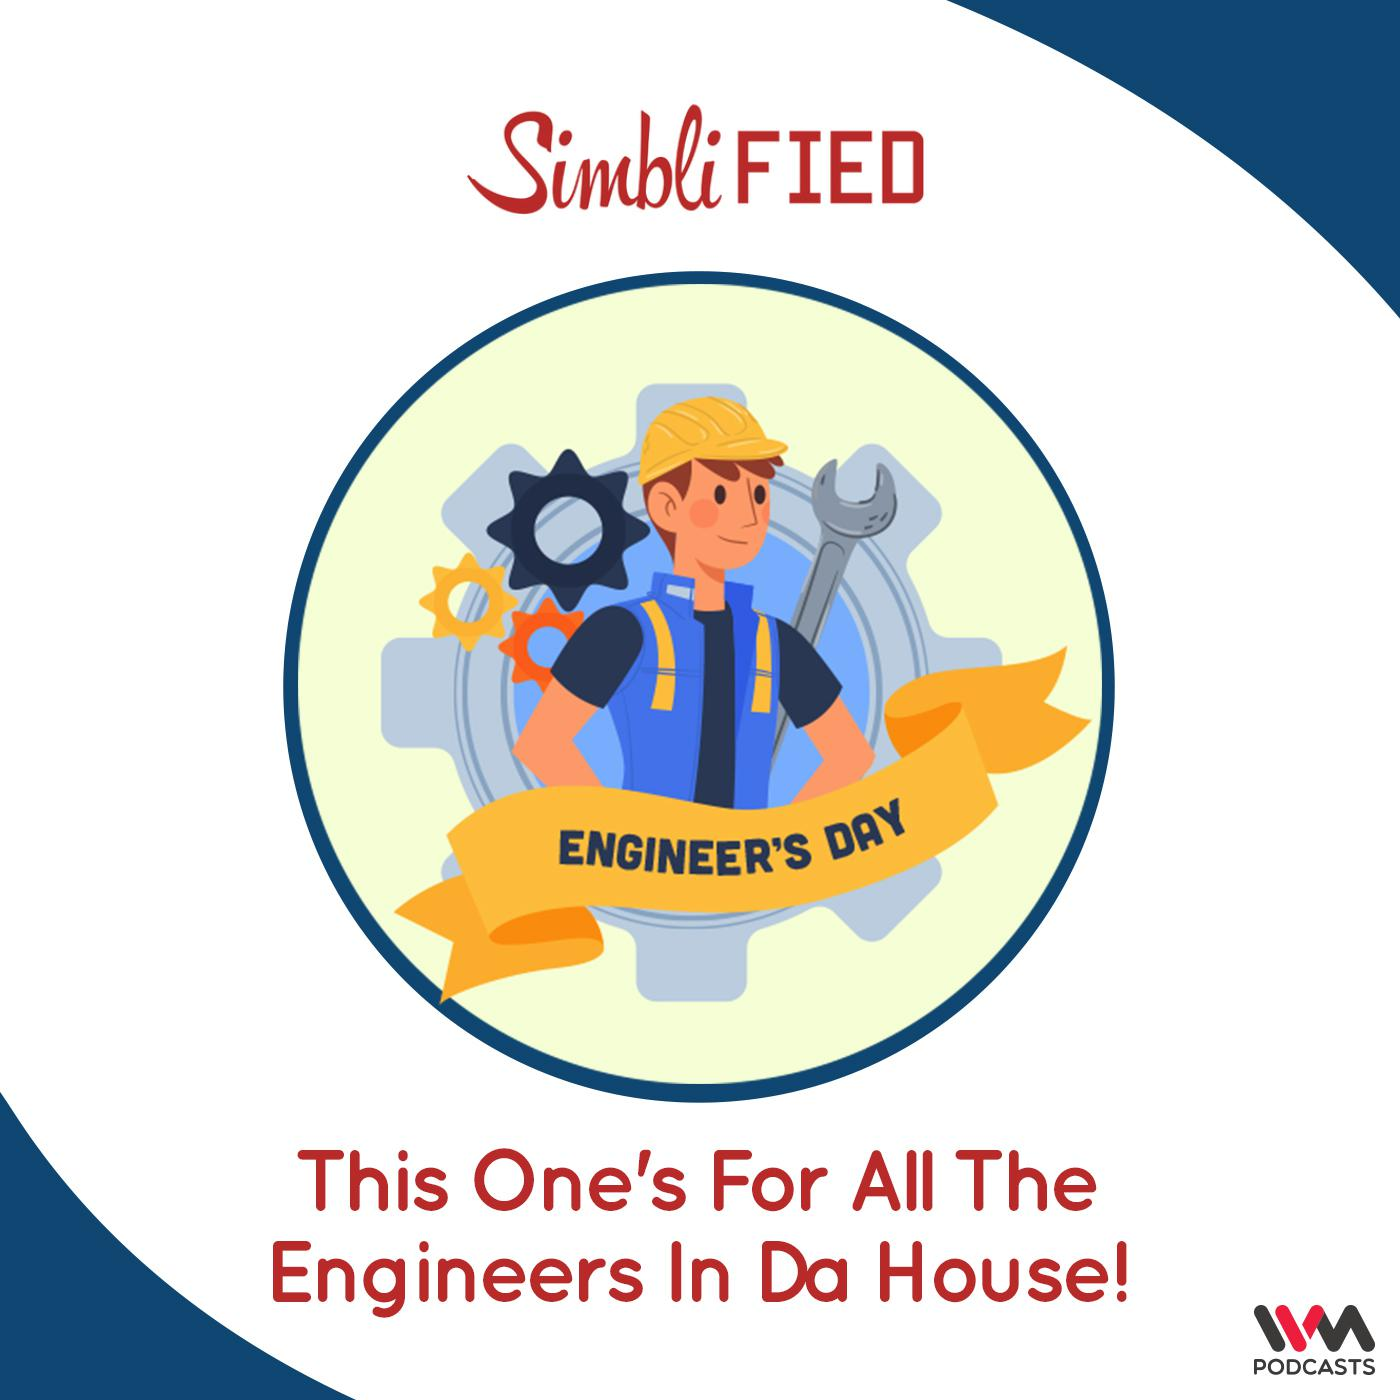 This One's For All The Engineers In Da House!